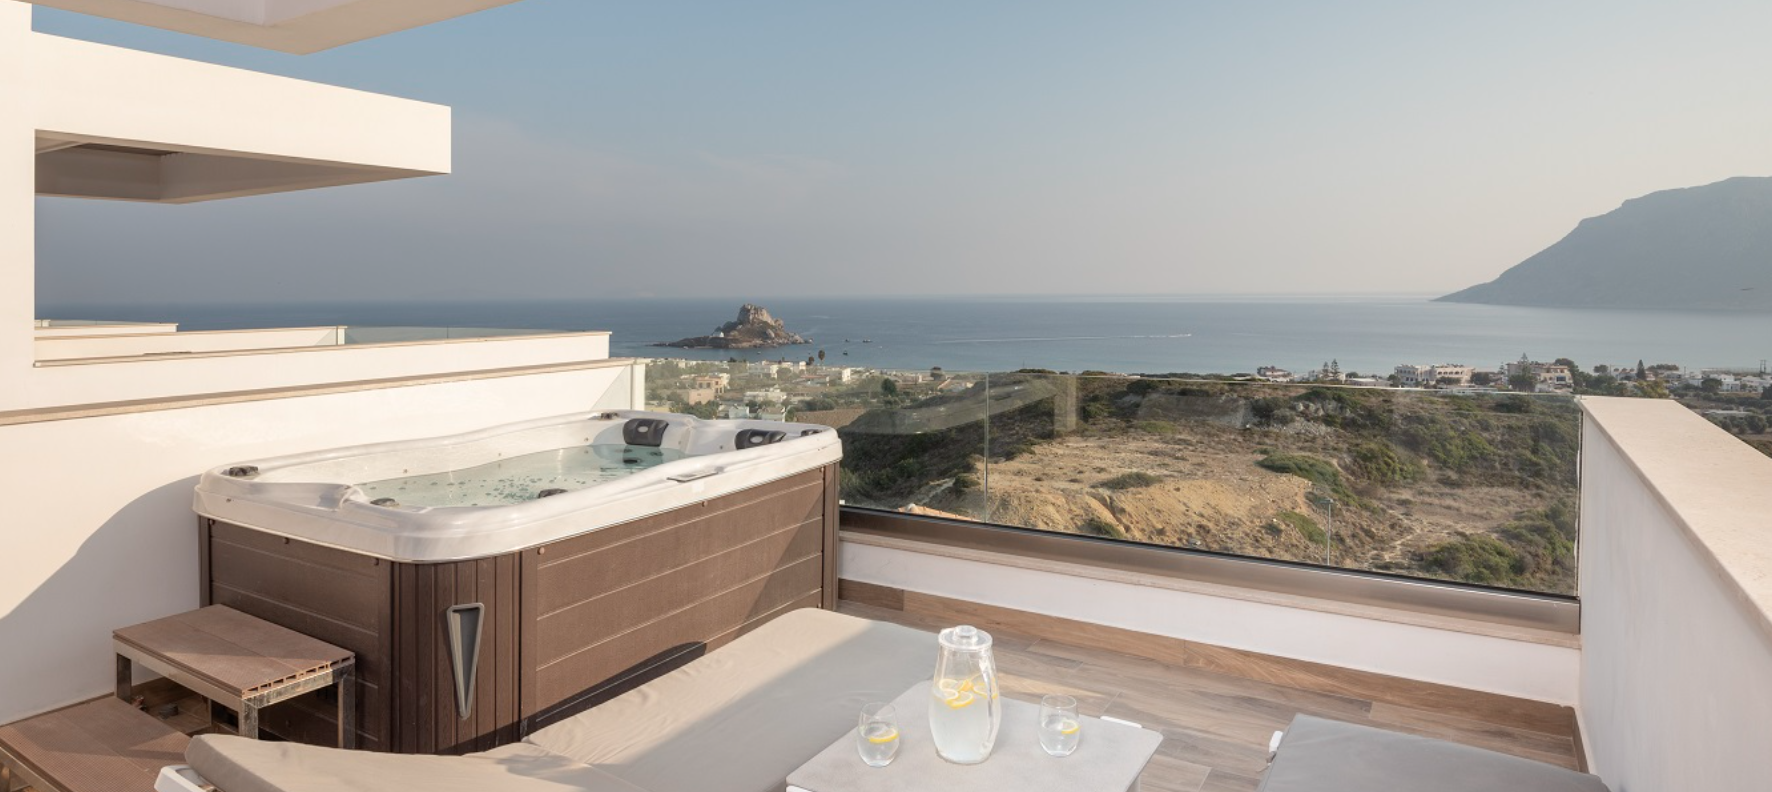 Superior Suite Outdoor Jacuzzi Sea View, White Rock Of Kos